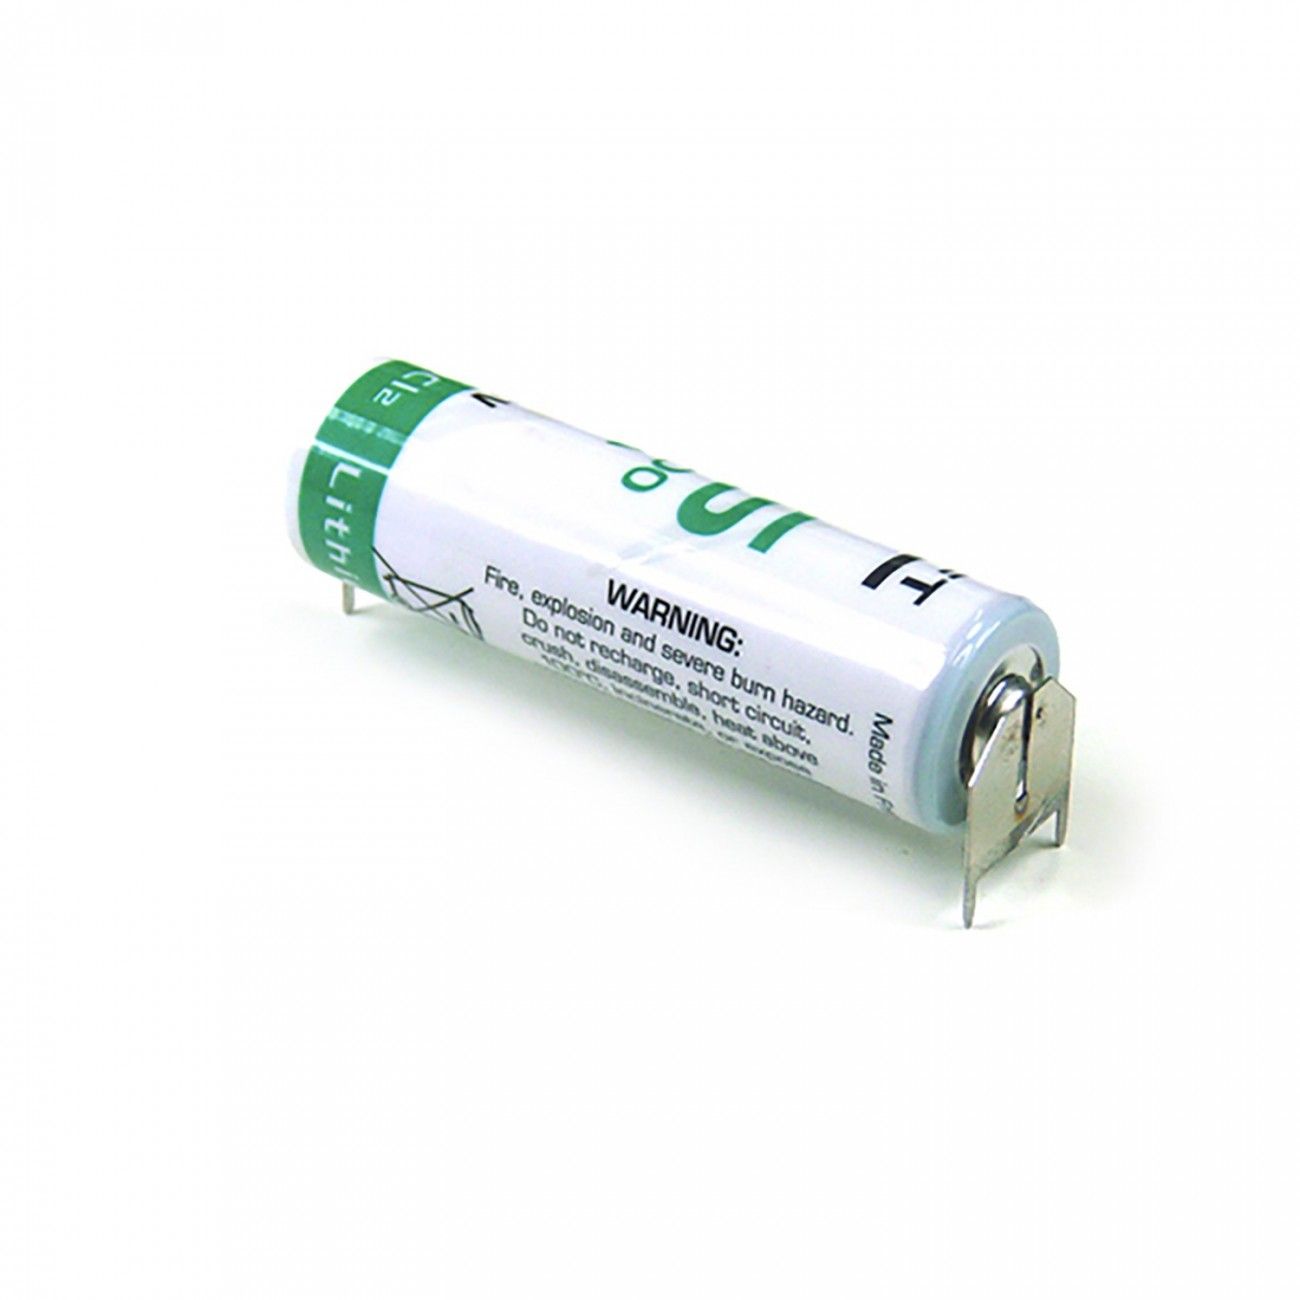 Pile lithium 3.7v rechargeable - Microcell